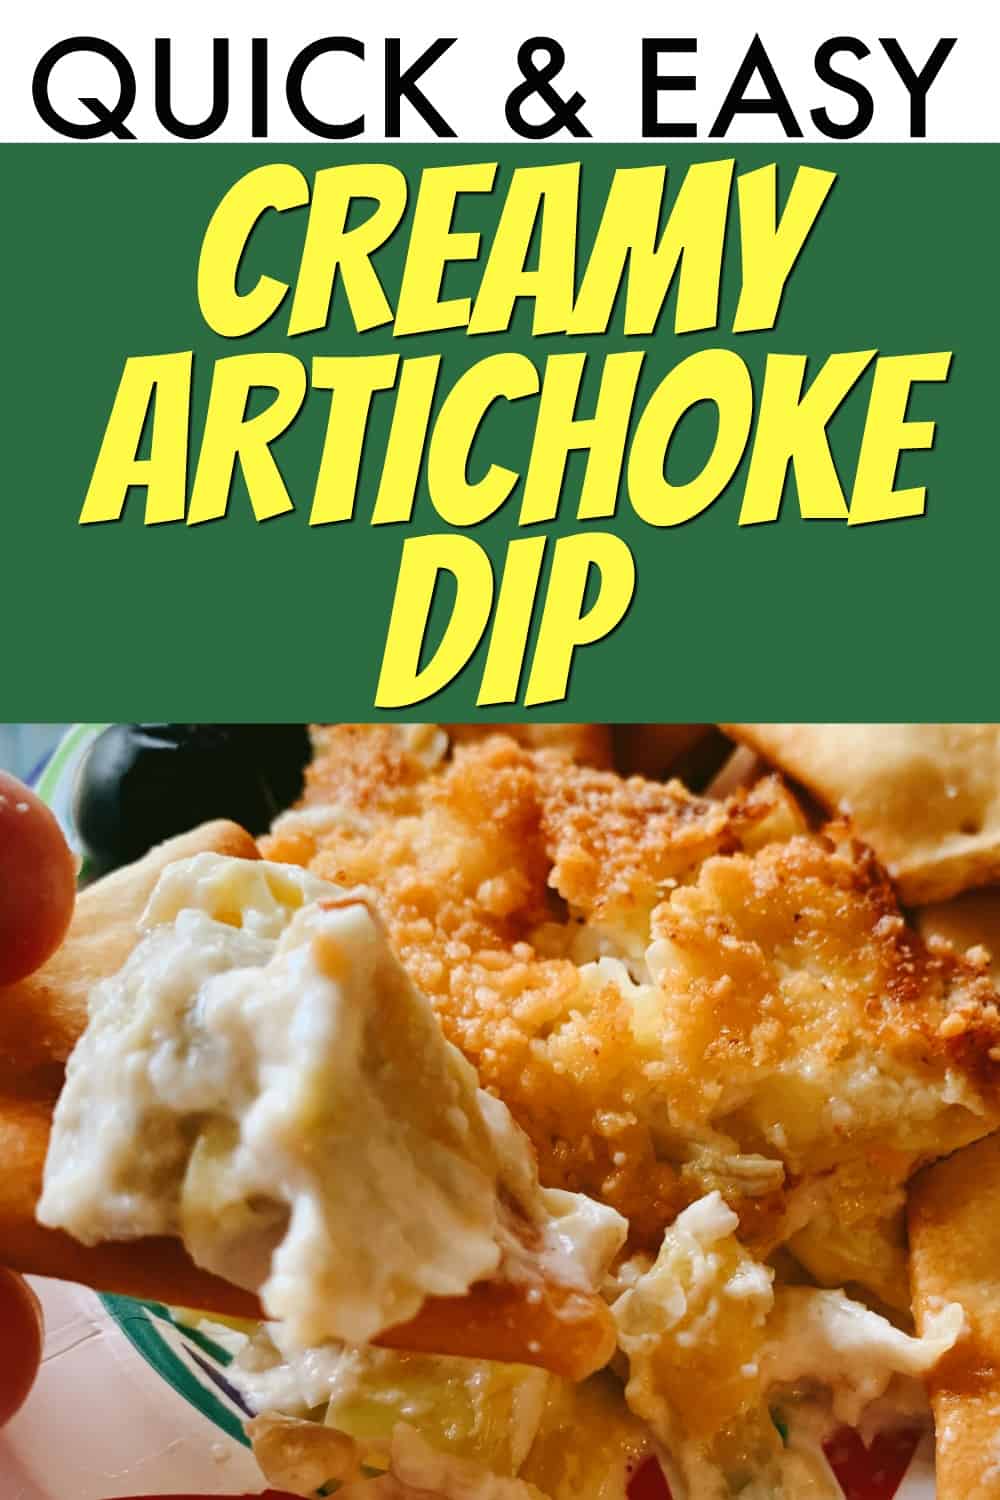 EASY ARTICHOKE DIP RECIPE text over image of artichoke dip with crackers on a plate